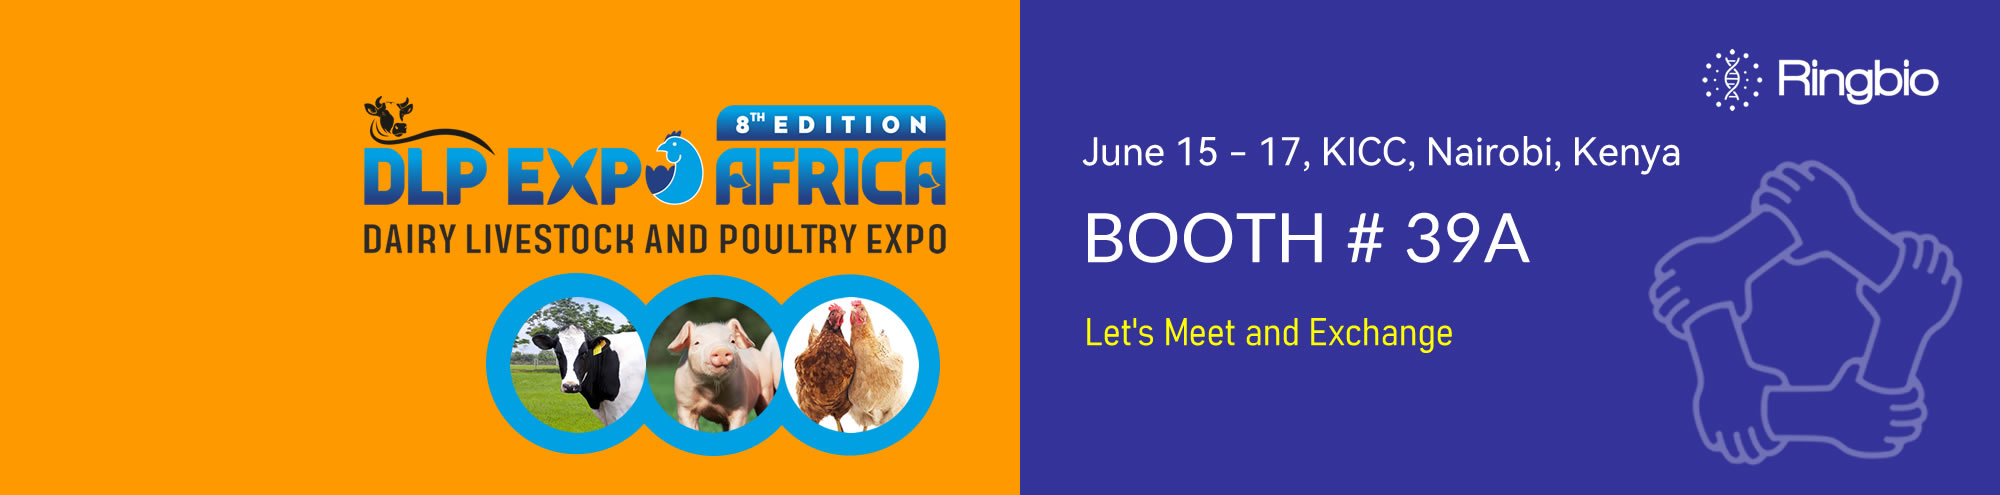 Welcome to visit Ringbio at Dairy Livestock Poultry Expo Kenya from Jun 15th to 17th.